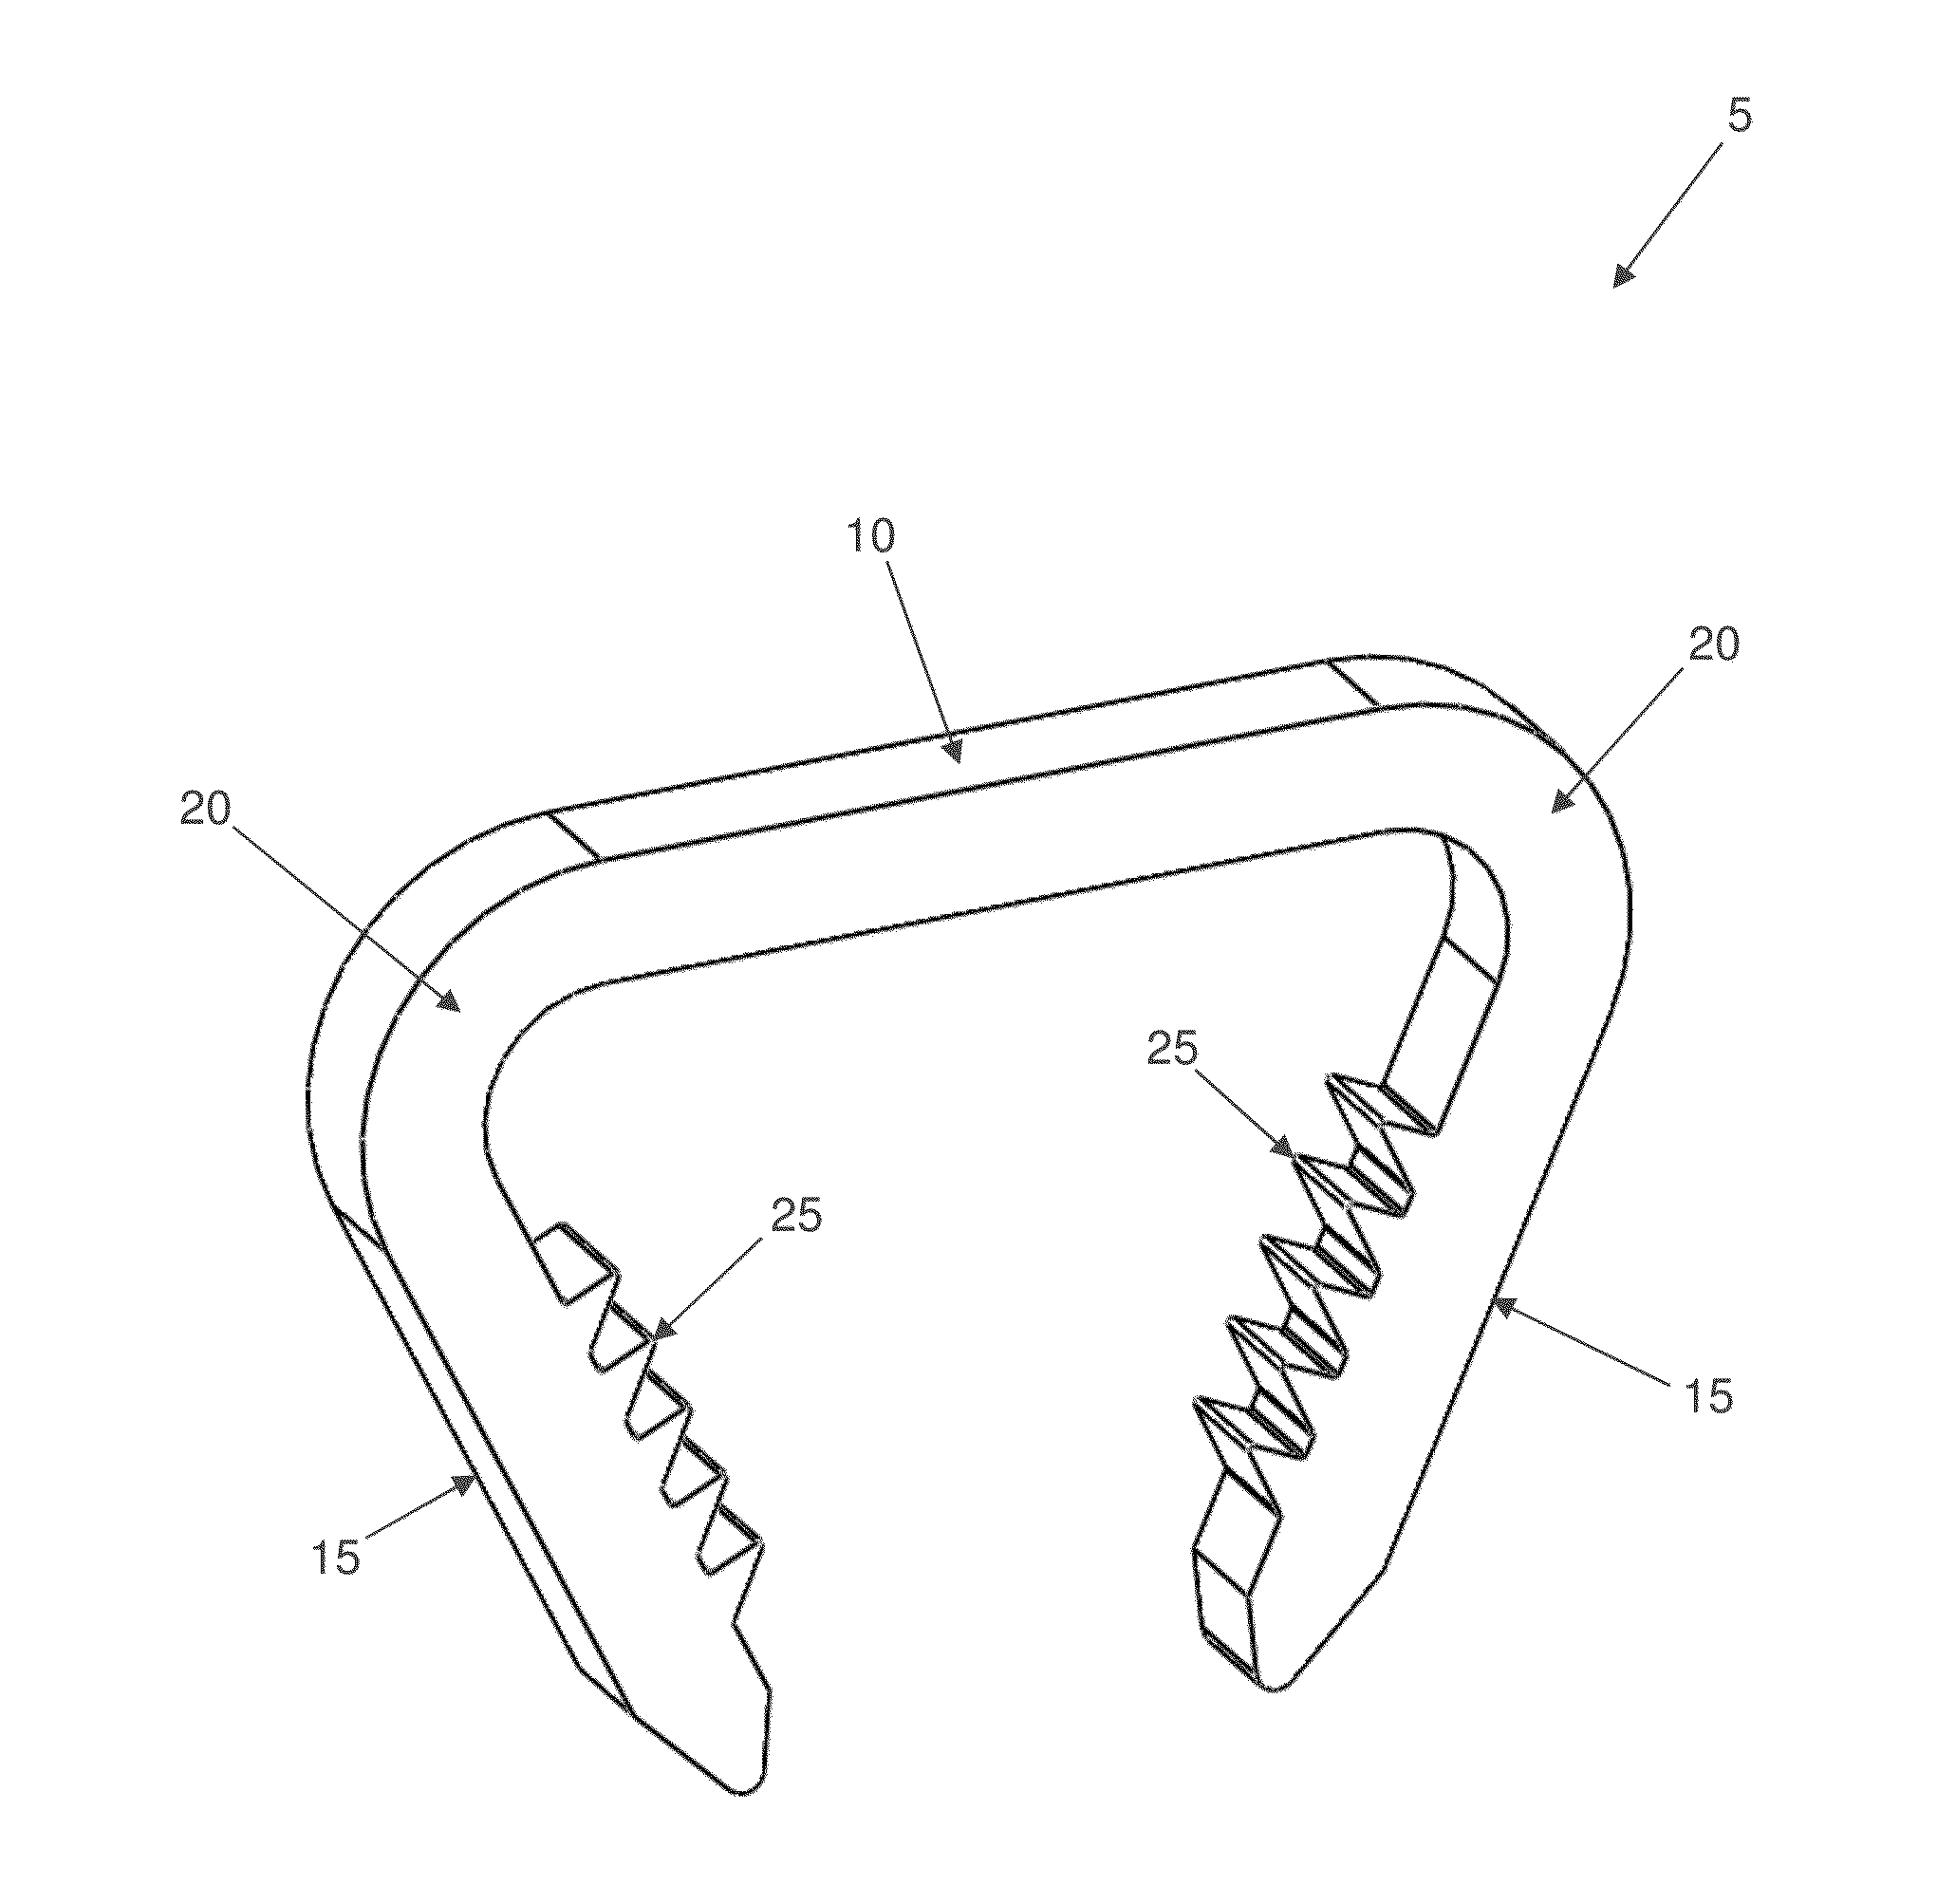 Staples for generating and applying compression within a body